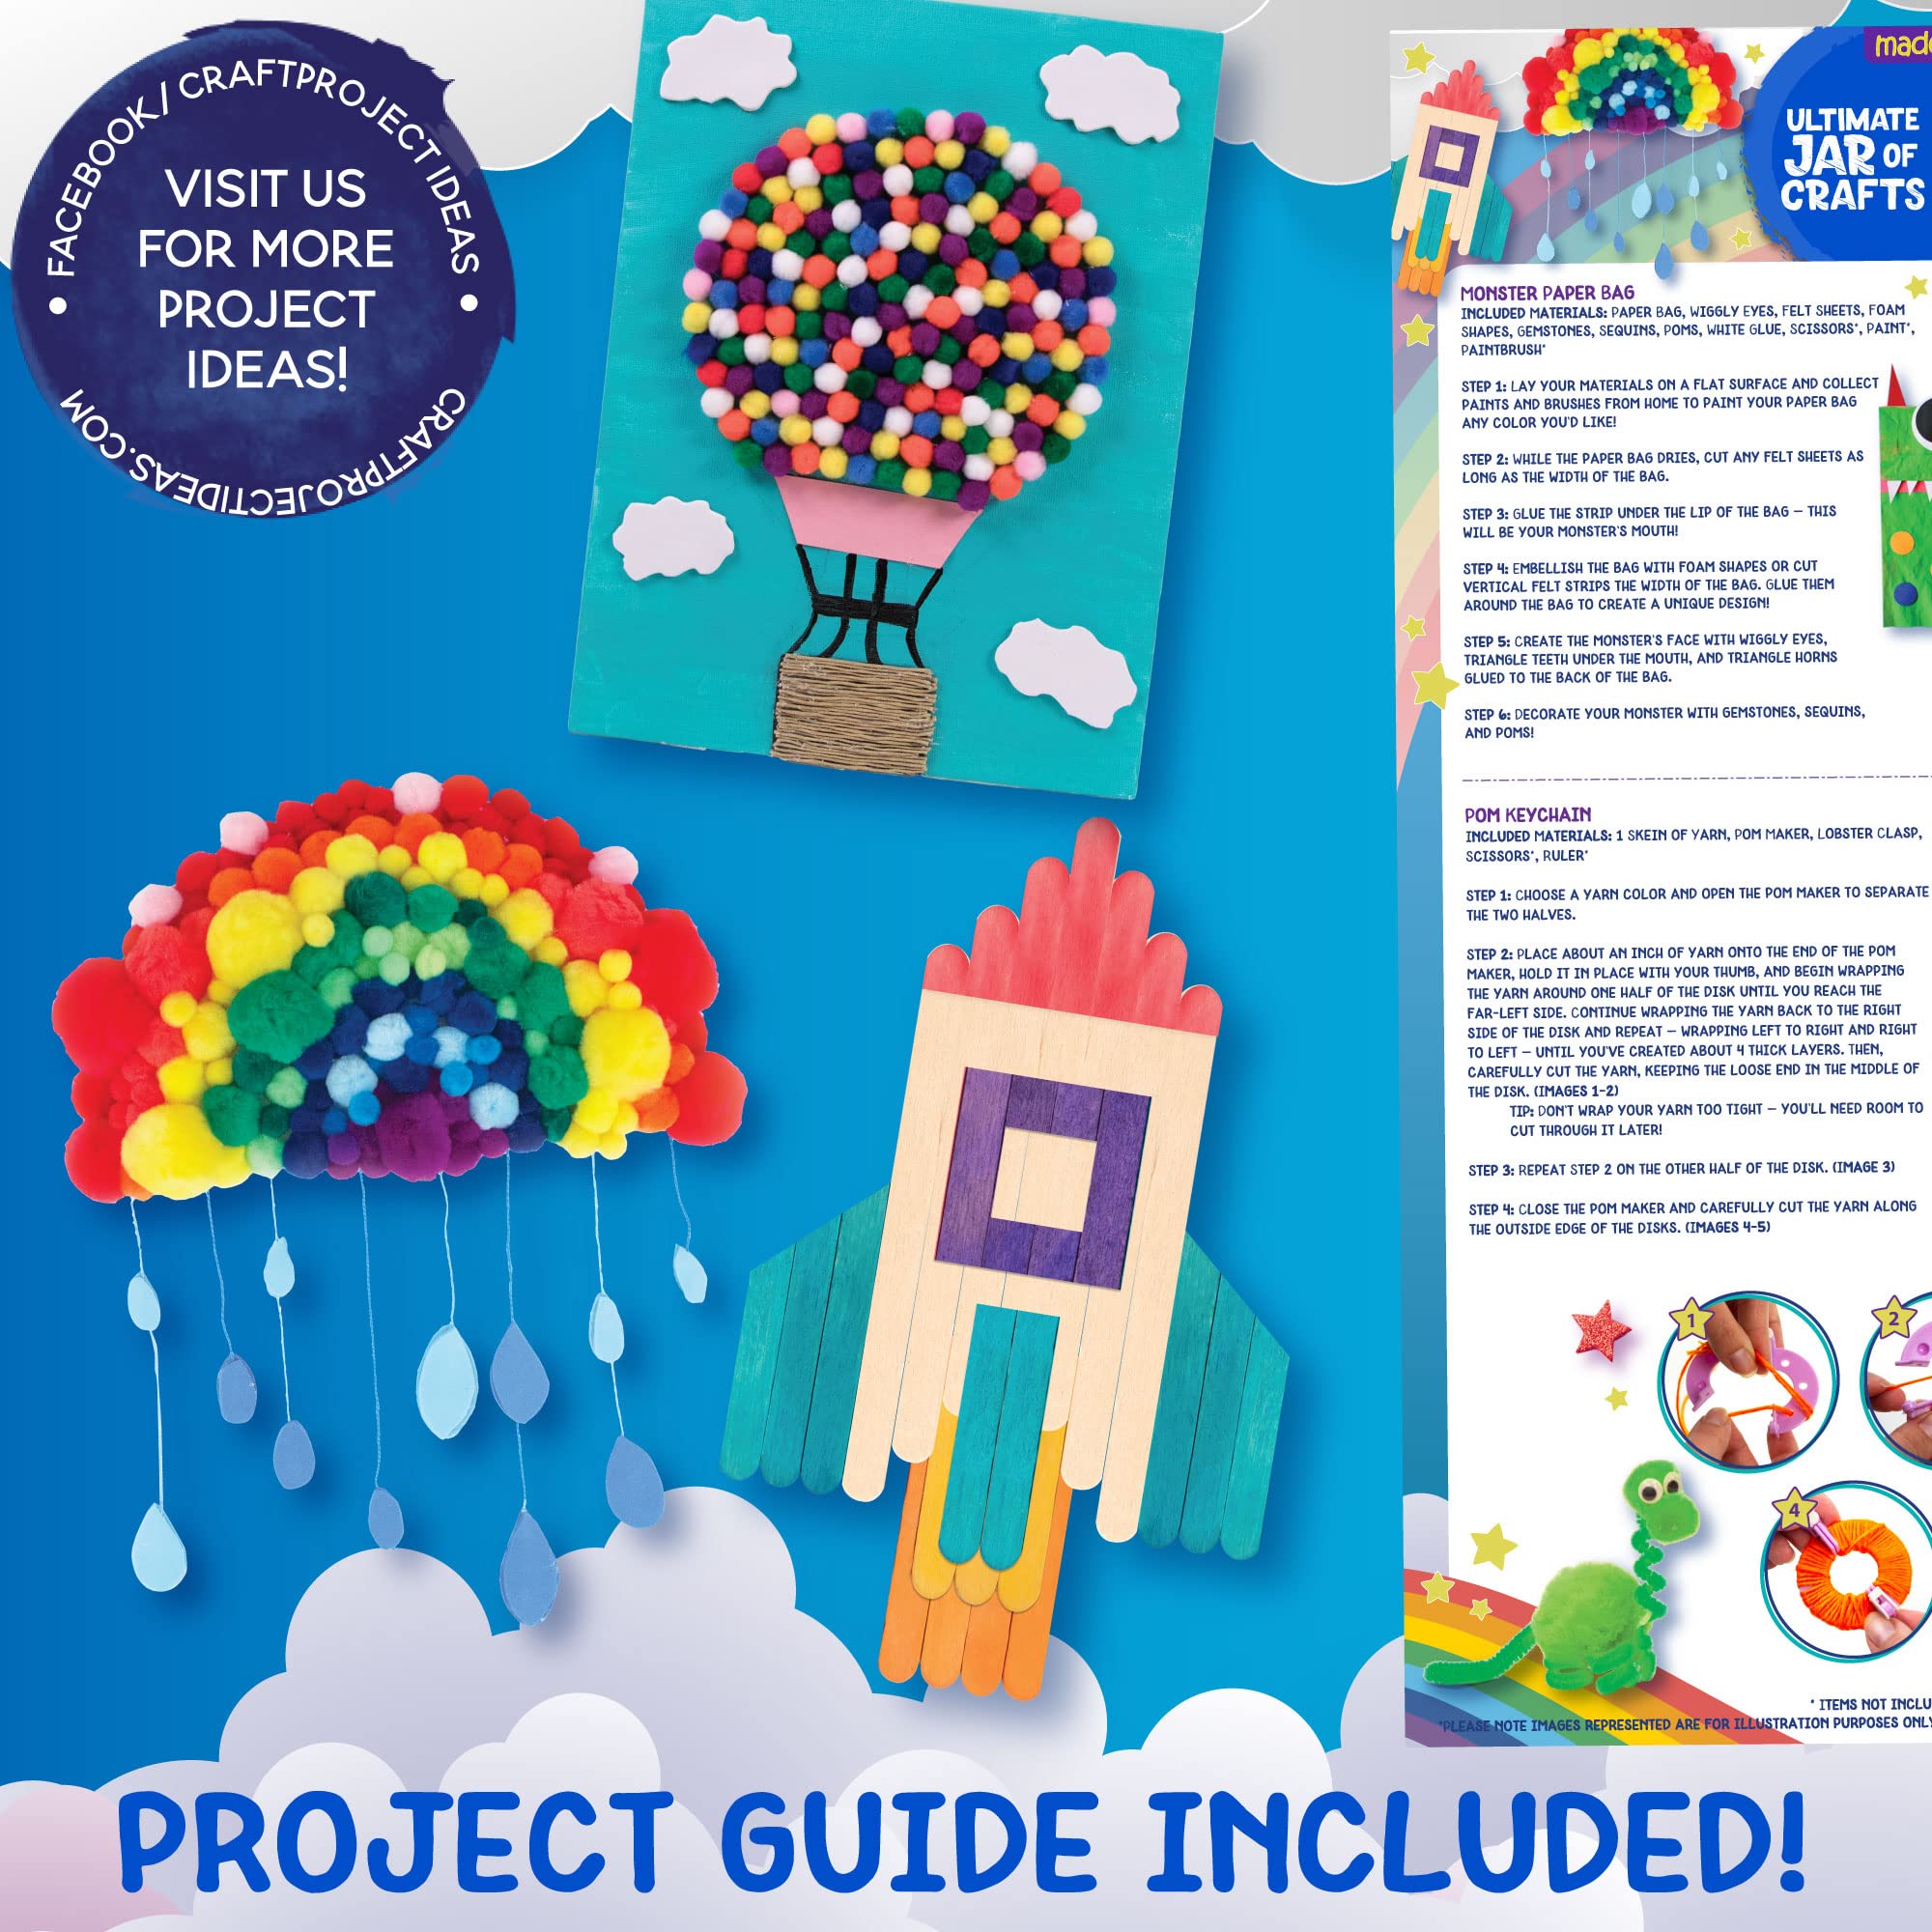 Made By Me! Ultimate Jar of Crafts, 200+ Piece Rainbow Craft Supply Bundle, Craft Supplies Starter Kit, Great Arts & Crafts Kit for Travel On-The-Go, Perfect for Kids Adults Ages 5, 6, 7, 8, 9, Multi